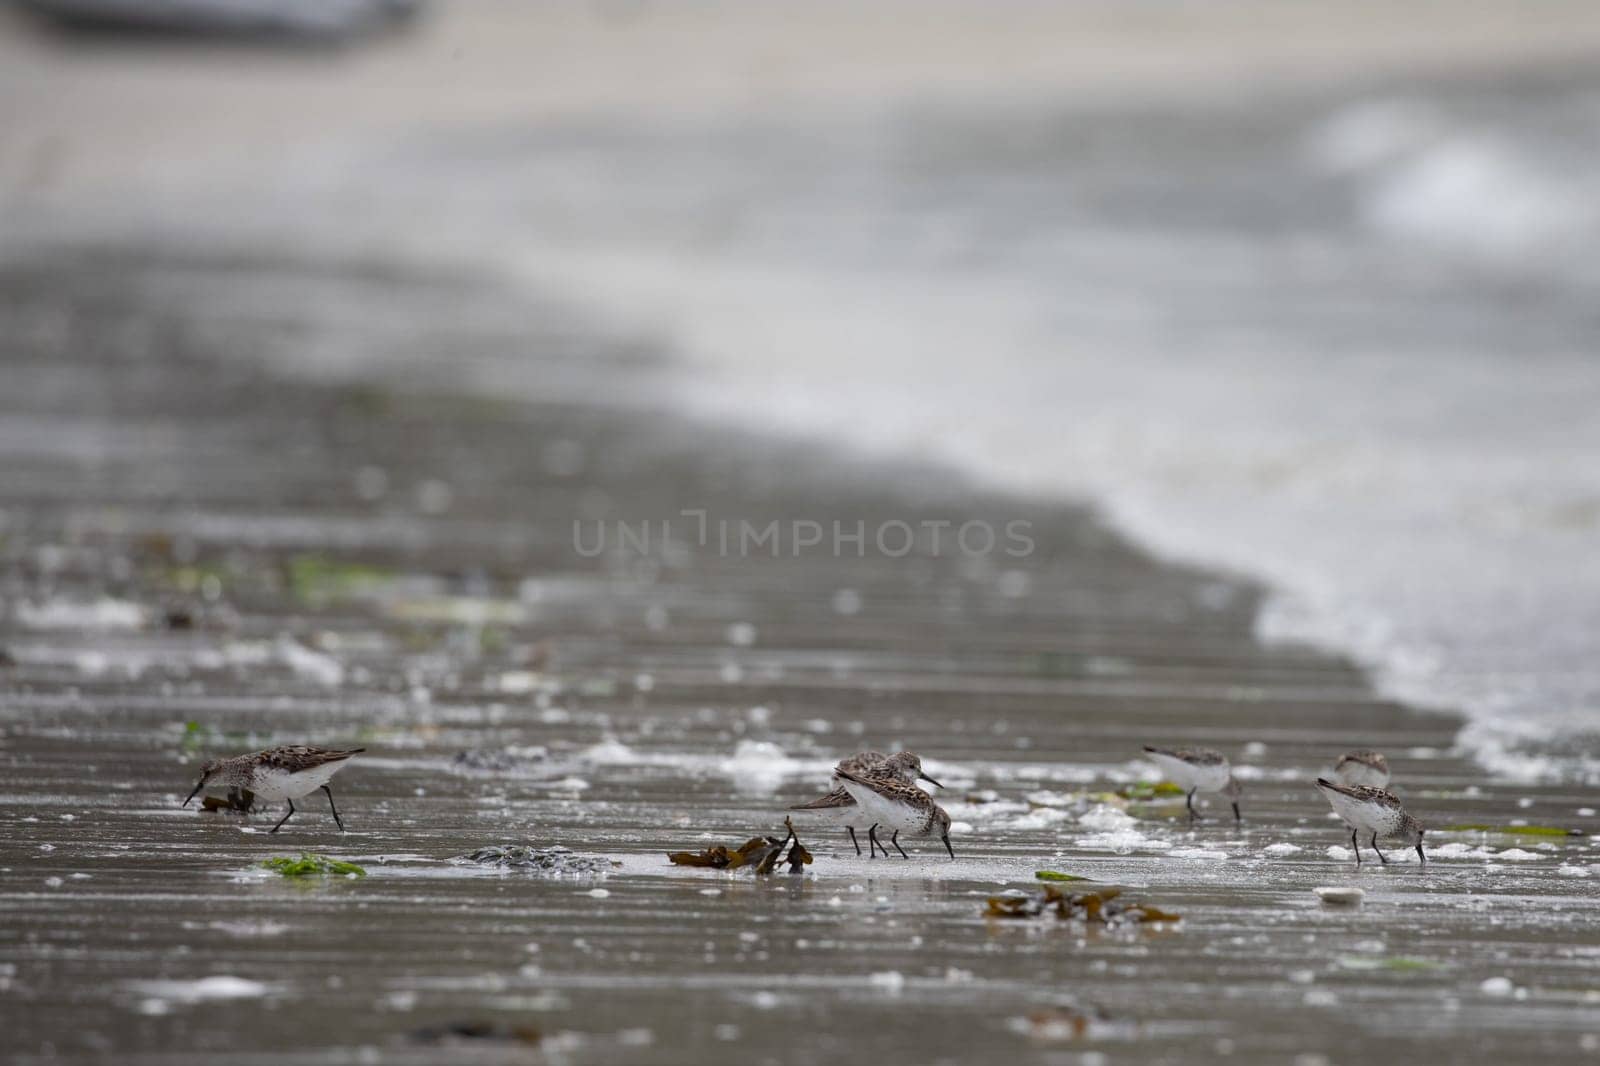 Western sandpipers wading along a deserted shoreline searching for food by Granchinho